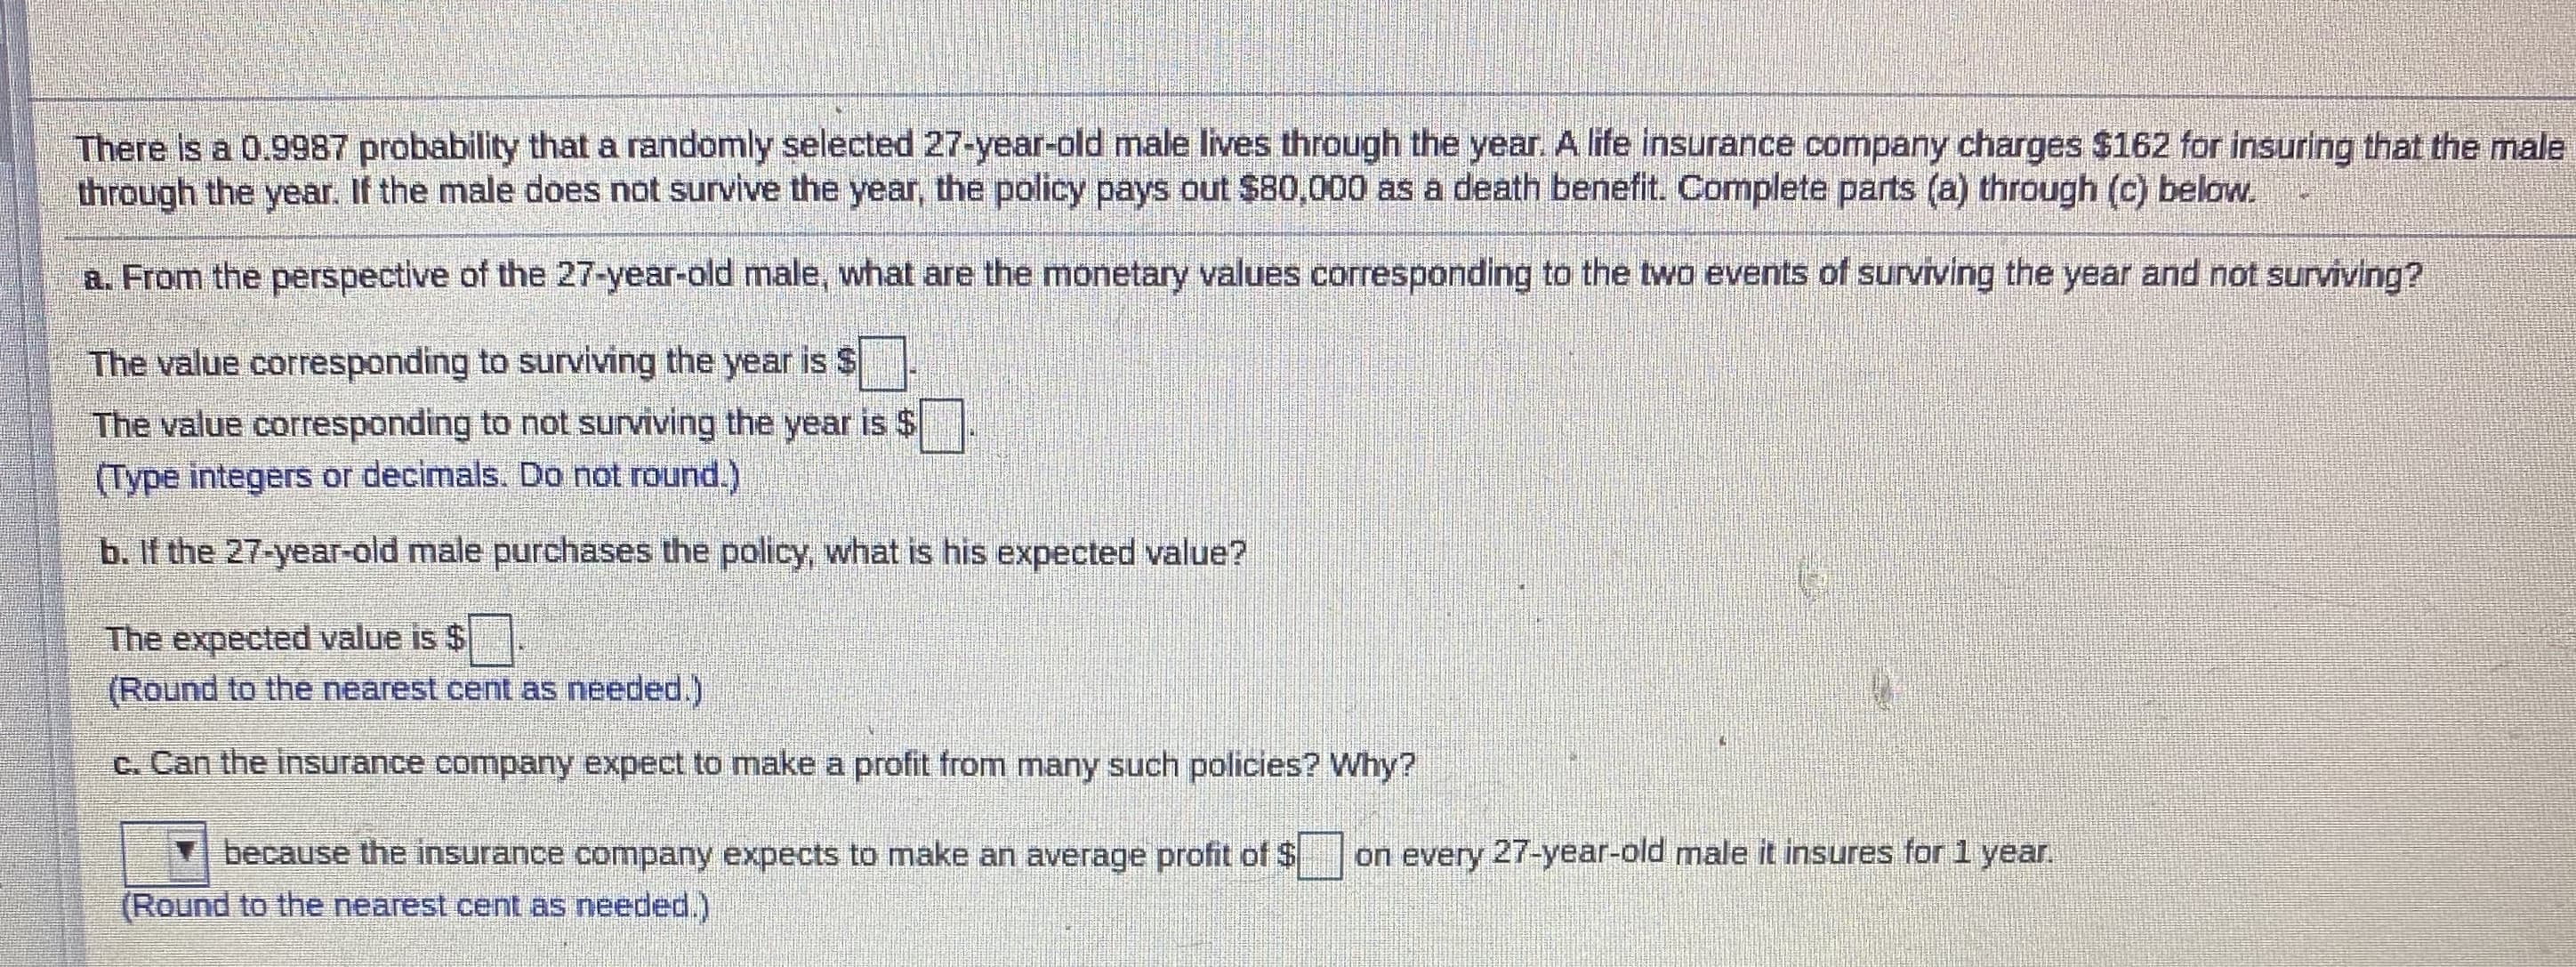 There is a 0.9987 probability that a randomly selected 27-year-old male lives through the year. A life insurance company charges $162 for insuring that the male
through the year. If the male does not survive the year, the policy pays out $80,000 as a death benefit. Complete parts (a) through (c) below.
